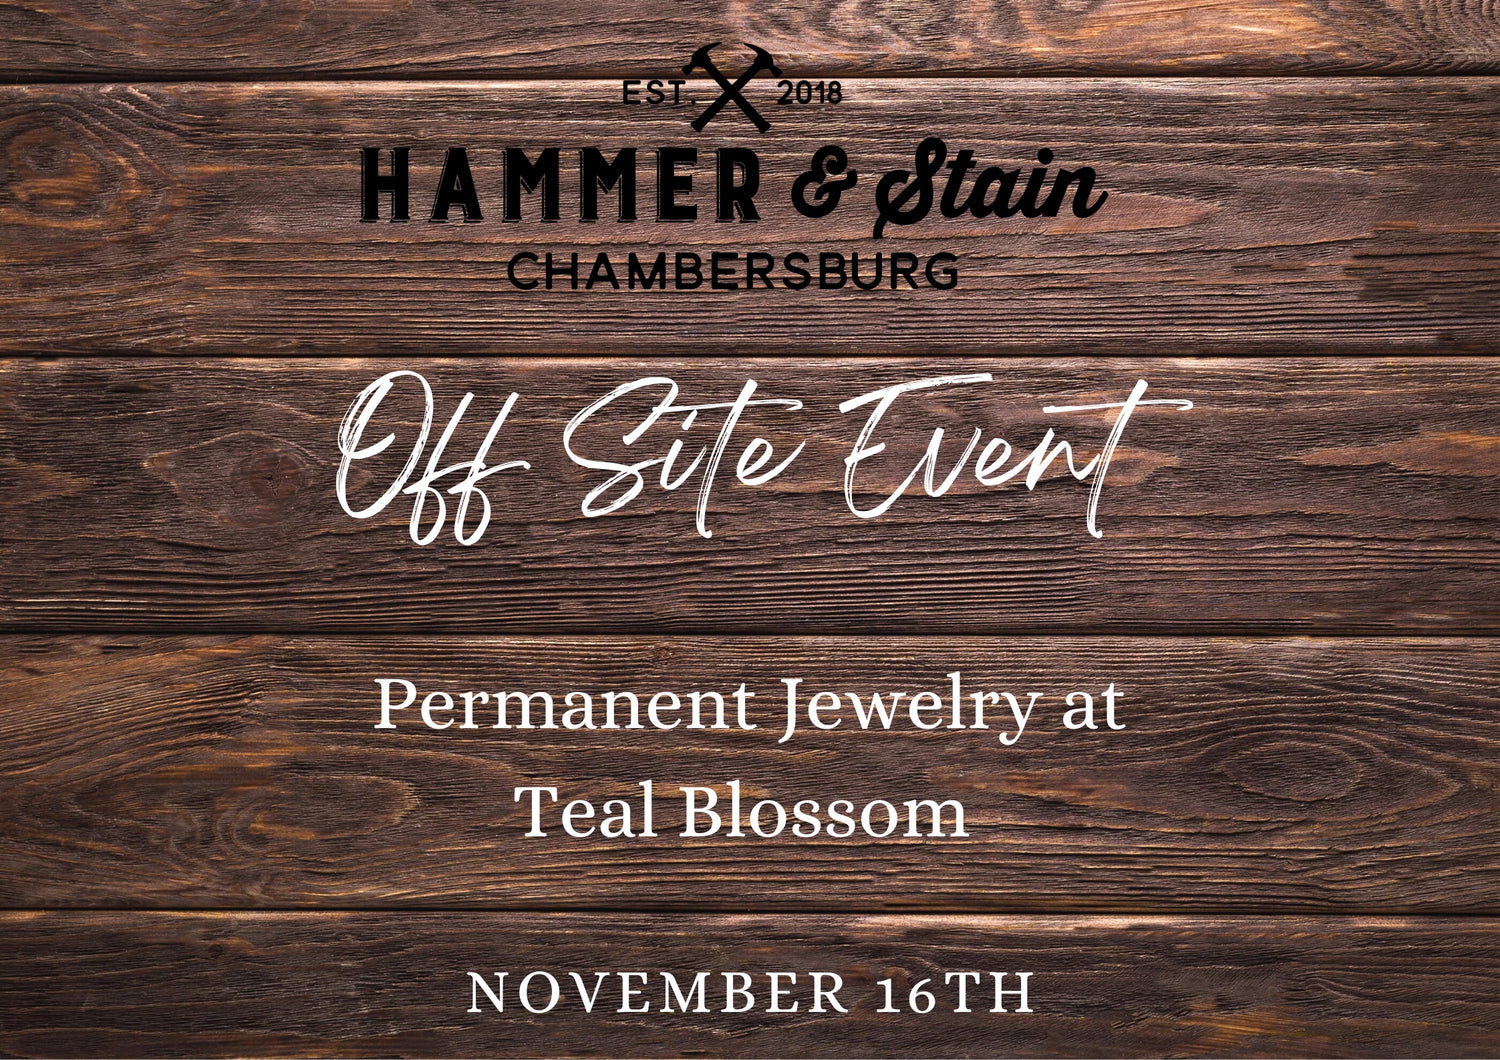 11/16/23 Teal Blossom Boutique Permanent Jewelry event 5p-7p